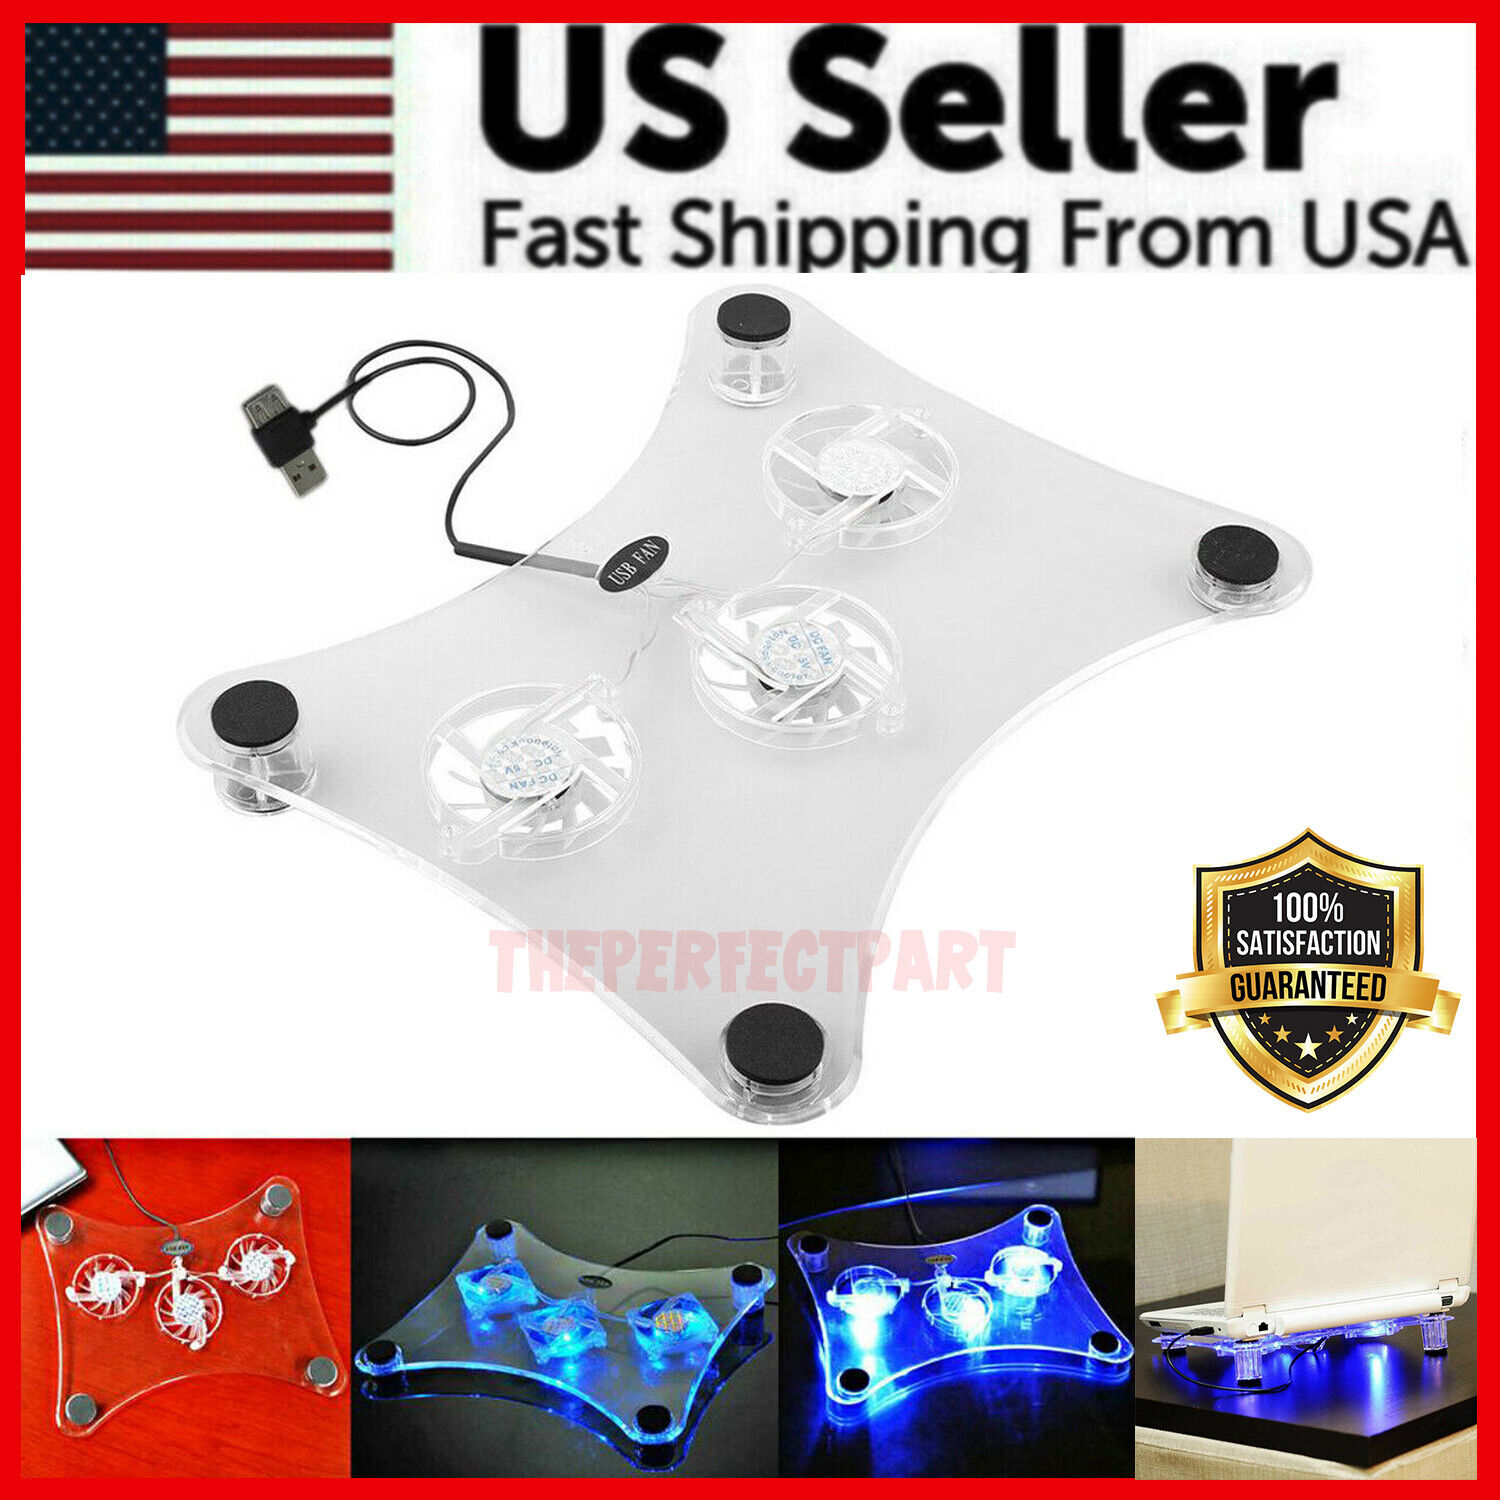 3 Fans USB Cooler Cooling Pad Stand LED Light Radiator For Laptop PC Notebook